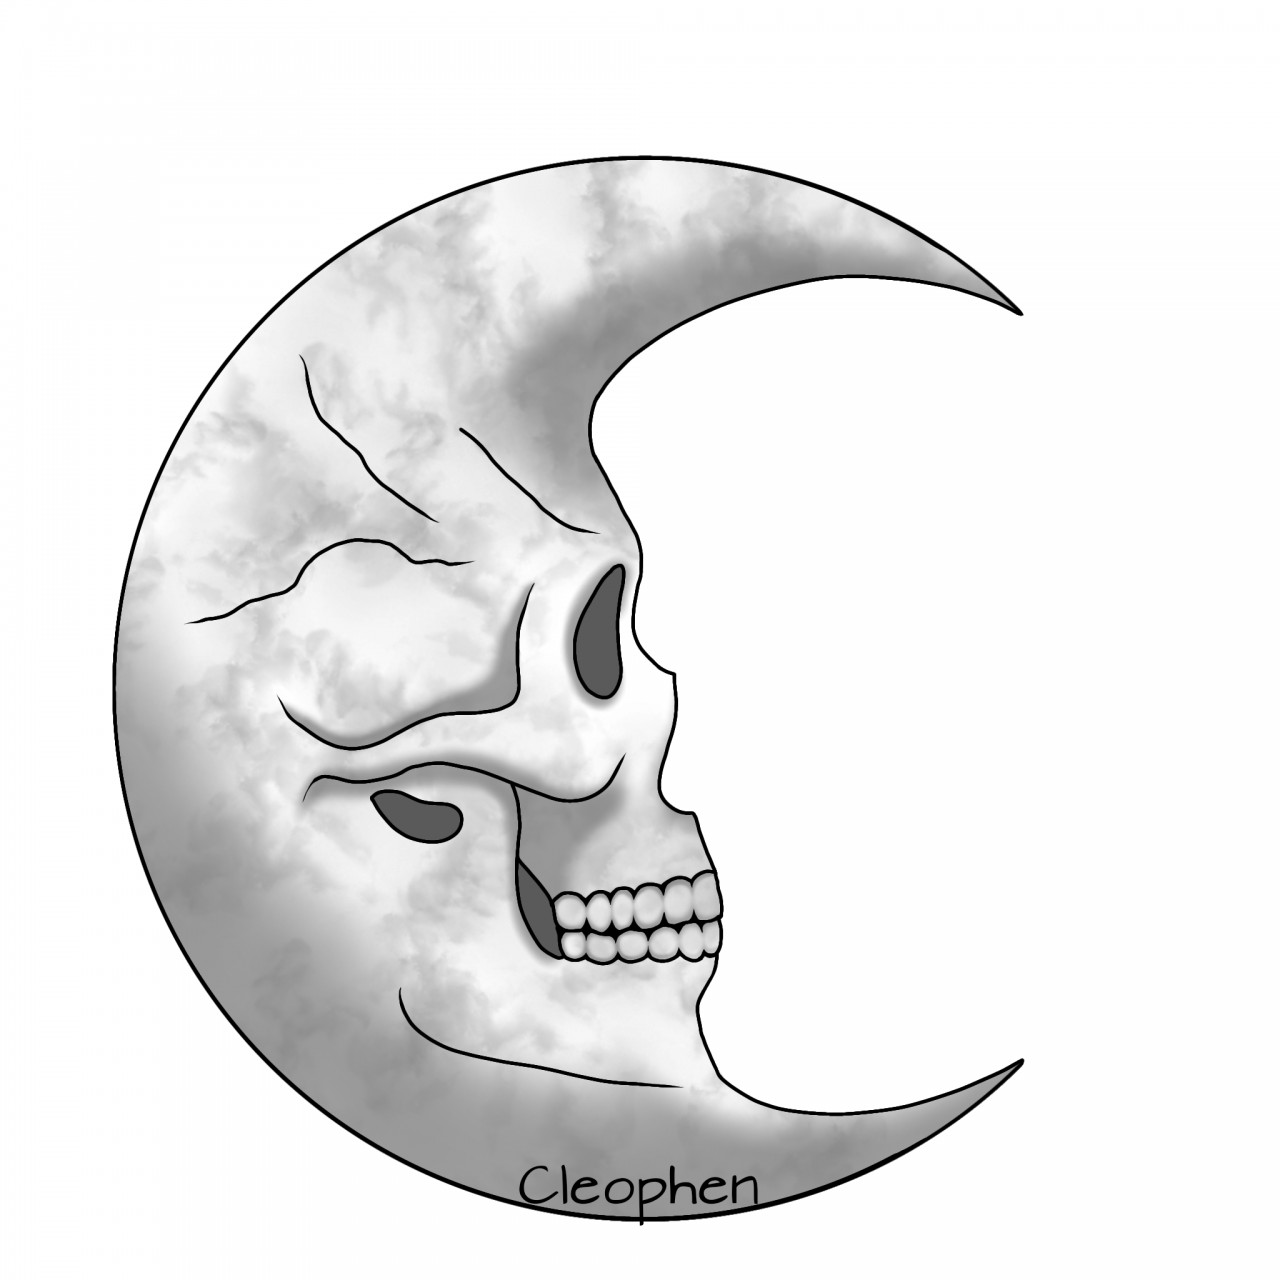 Out of Step Books  Gallery on Instagram Check out this rad skull  castle moon drawing that y  Skull sleeve tattoos Dark art tattoo  Tattoo design drawings